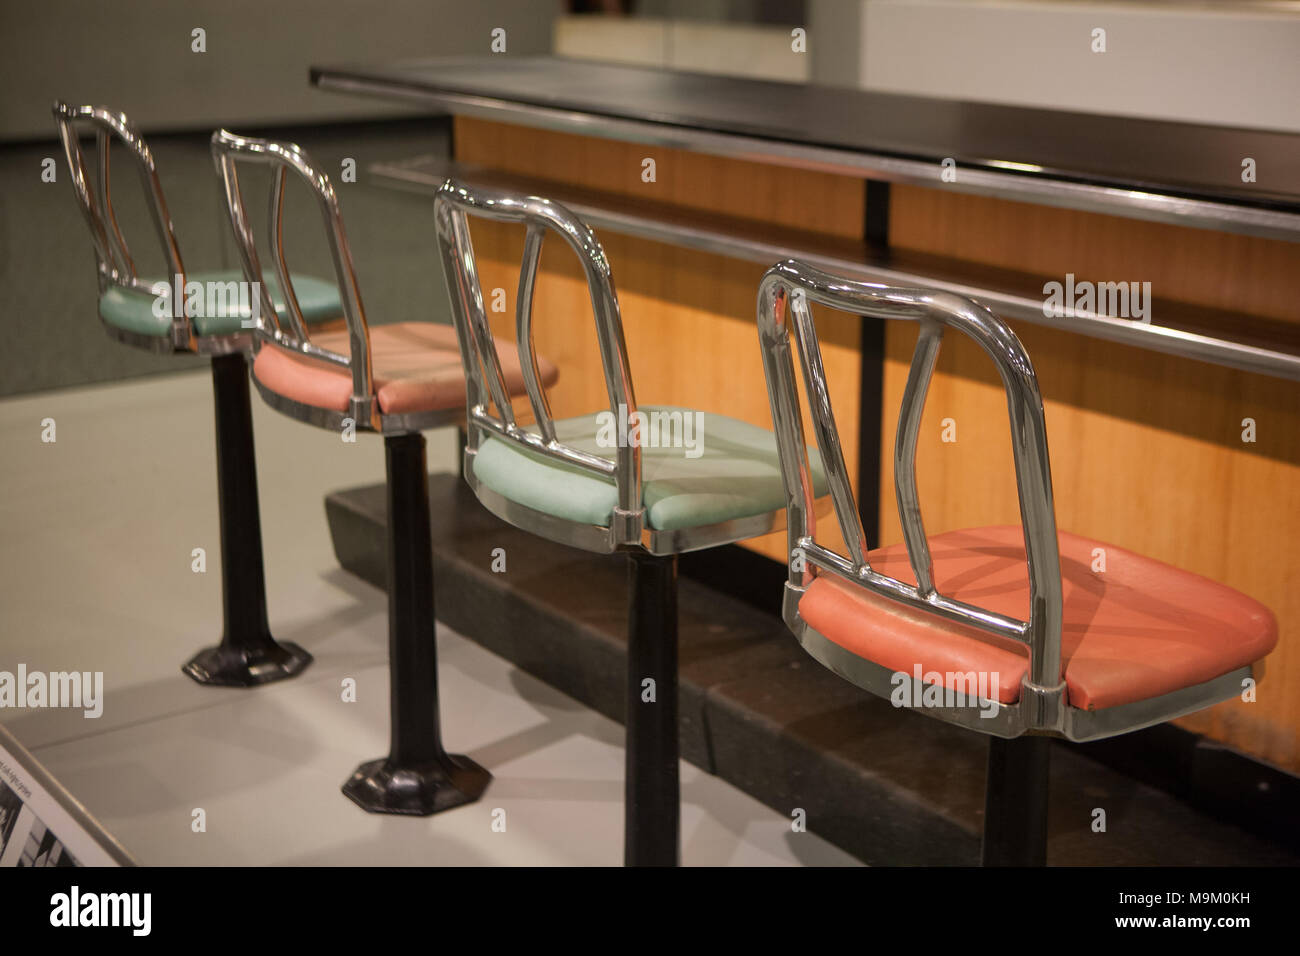 Woolworth's lunch counter from Greensboro, North Carolina, site of a 1960 civil rights sit-in at the Smithsonian Museum in Washington, DC. Stock Photo